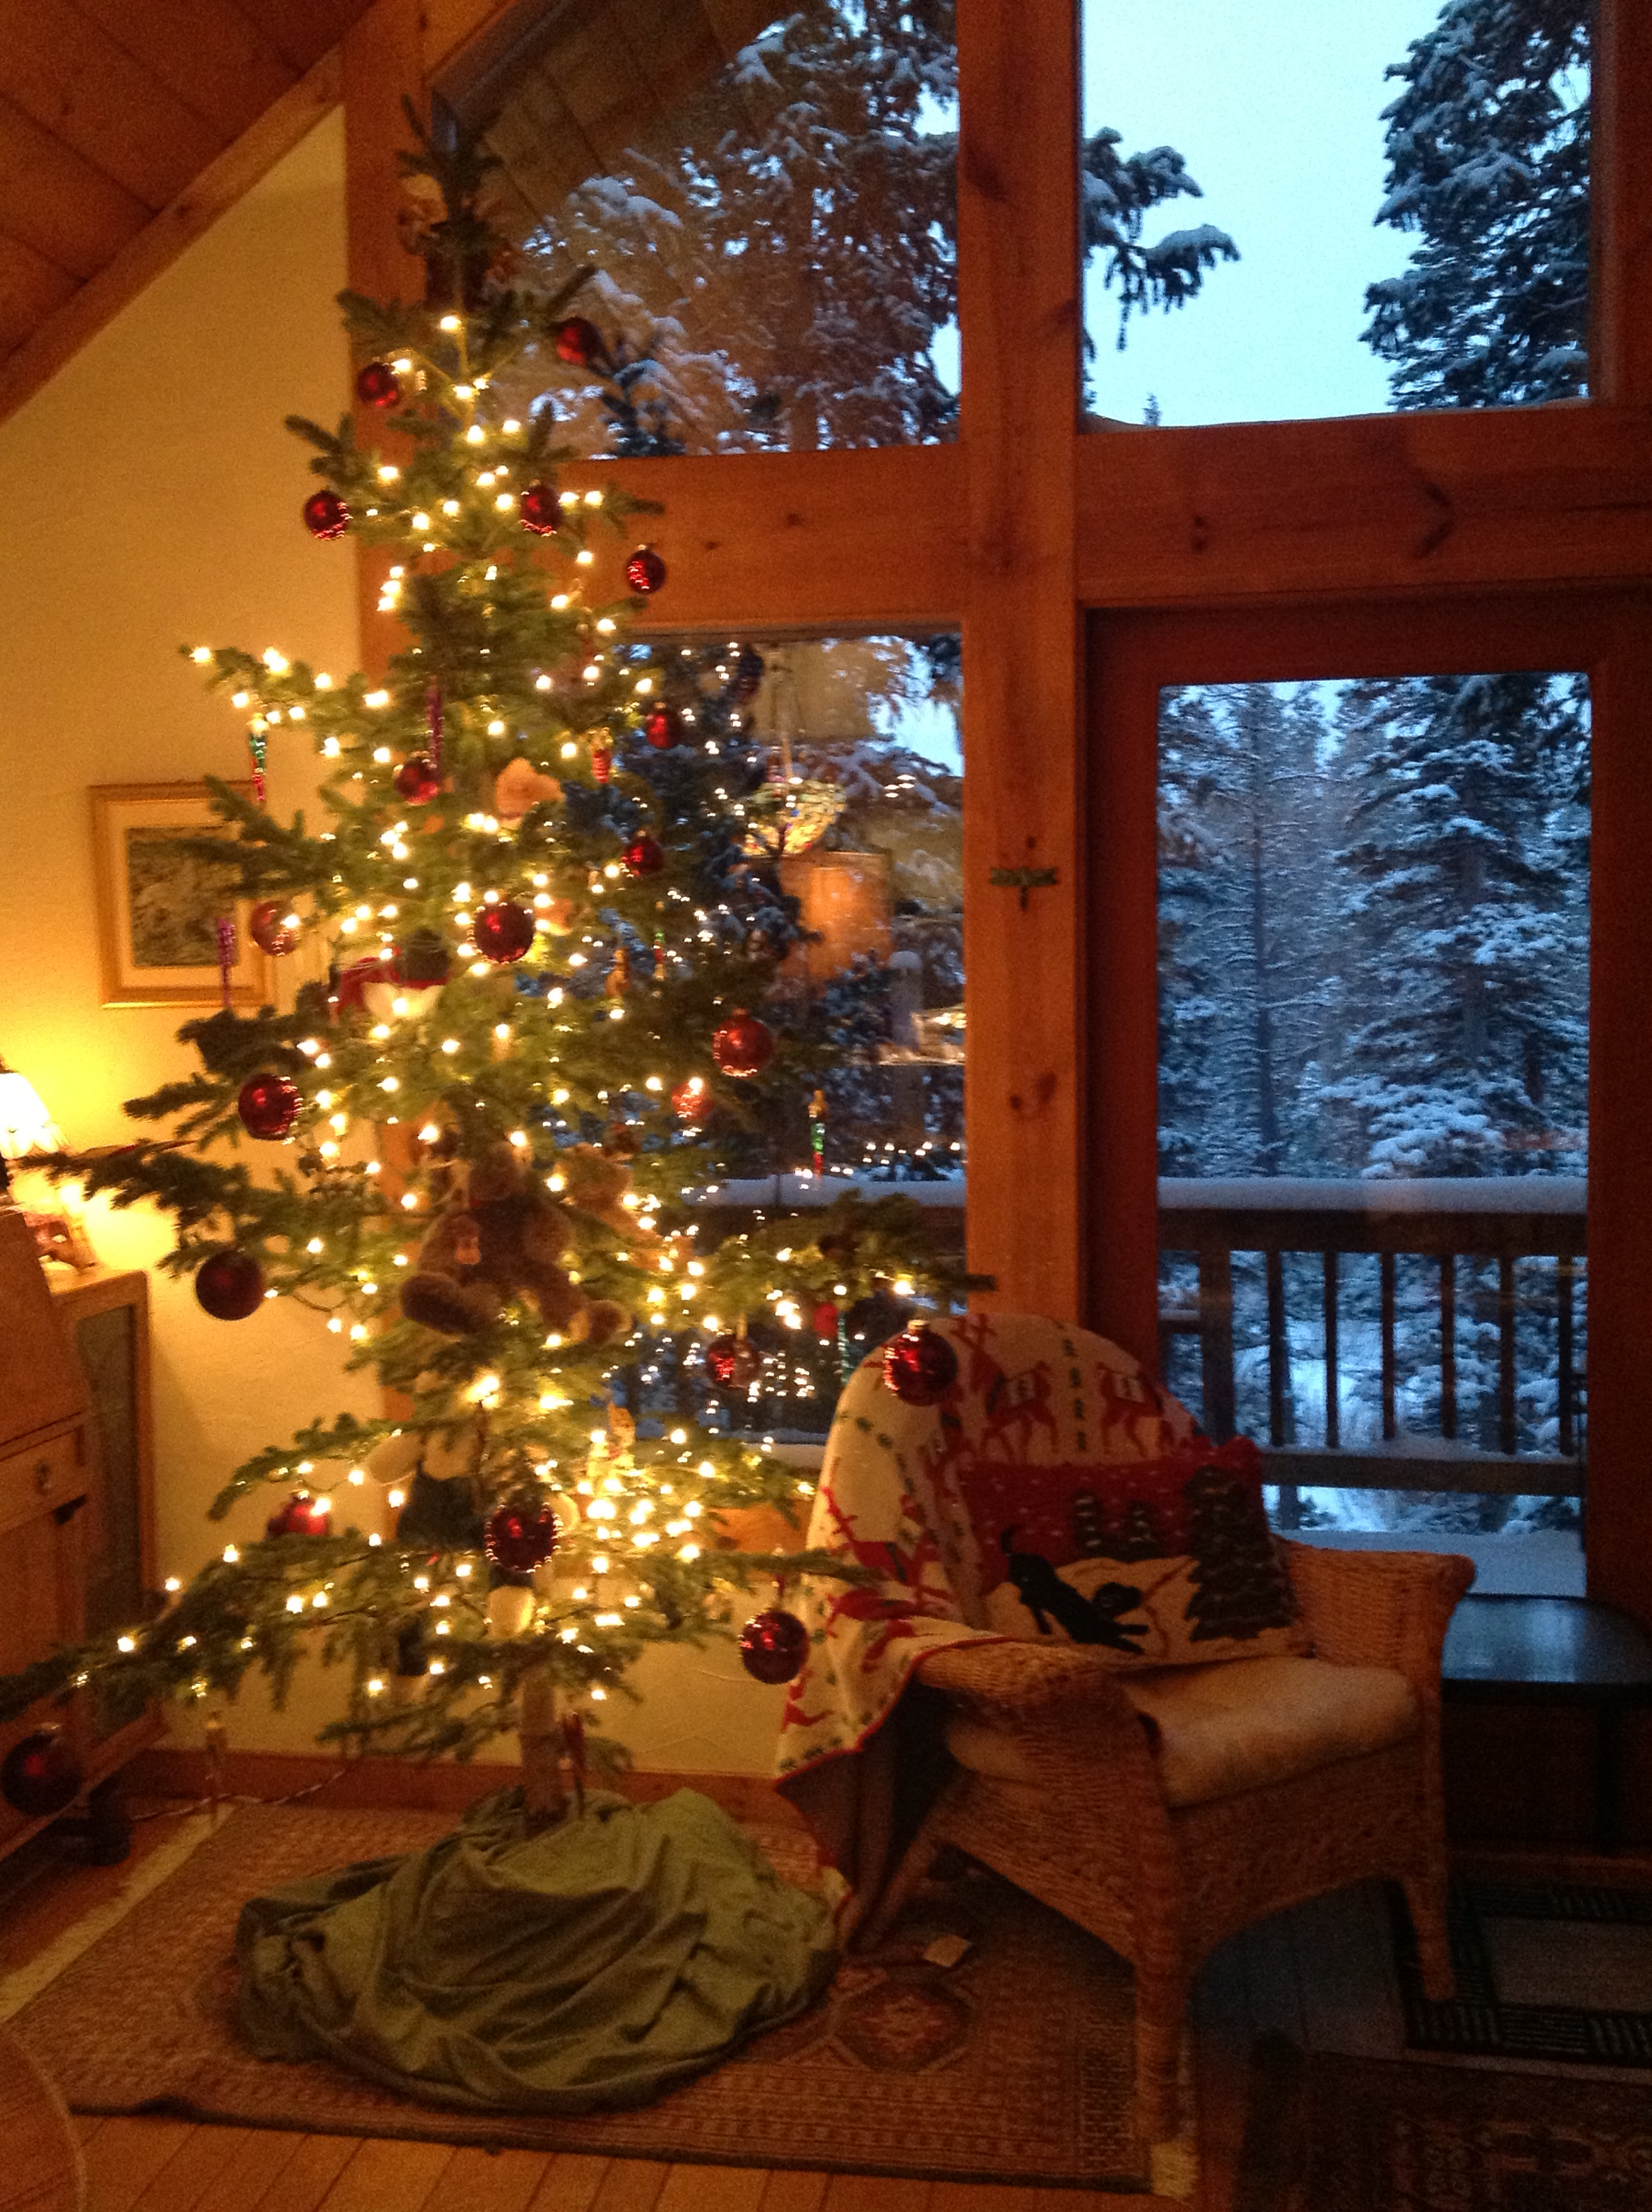 Christmas-Tree-with-Snow-Outside-the-Windows.